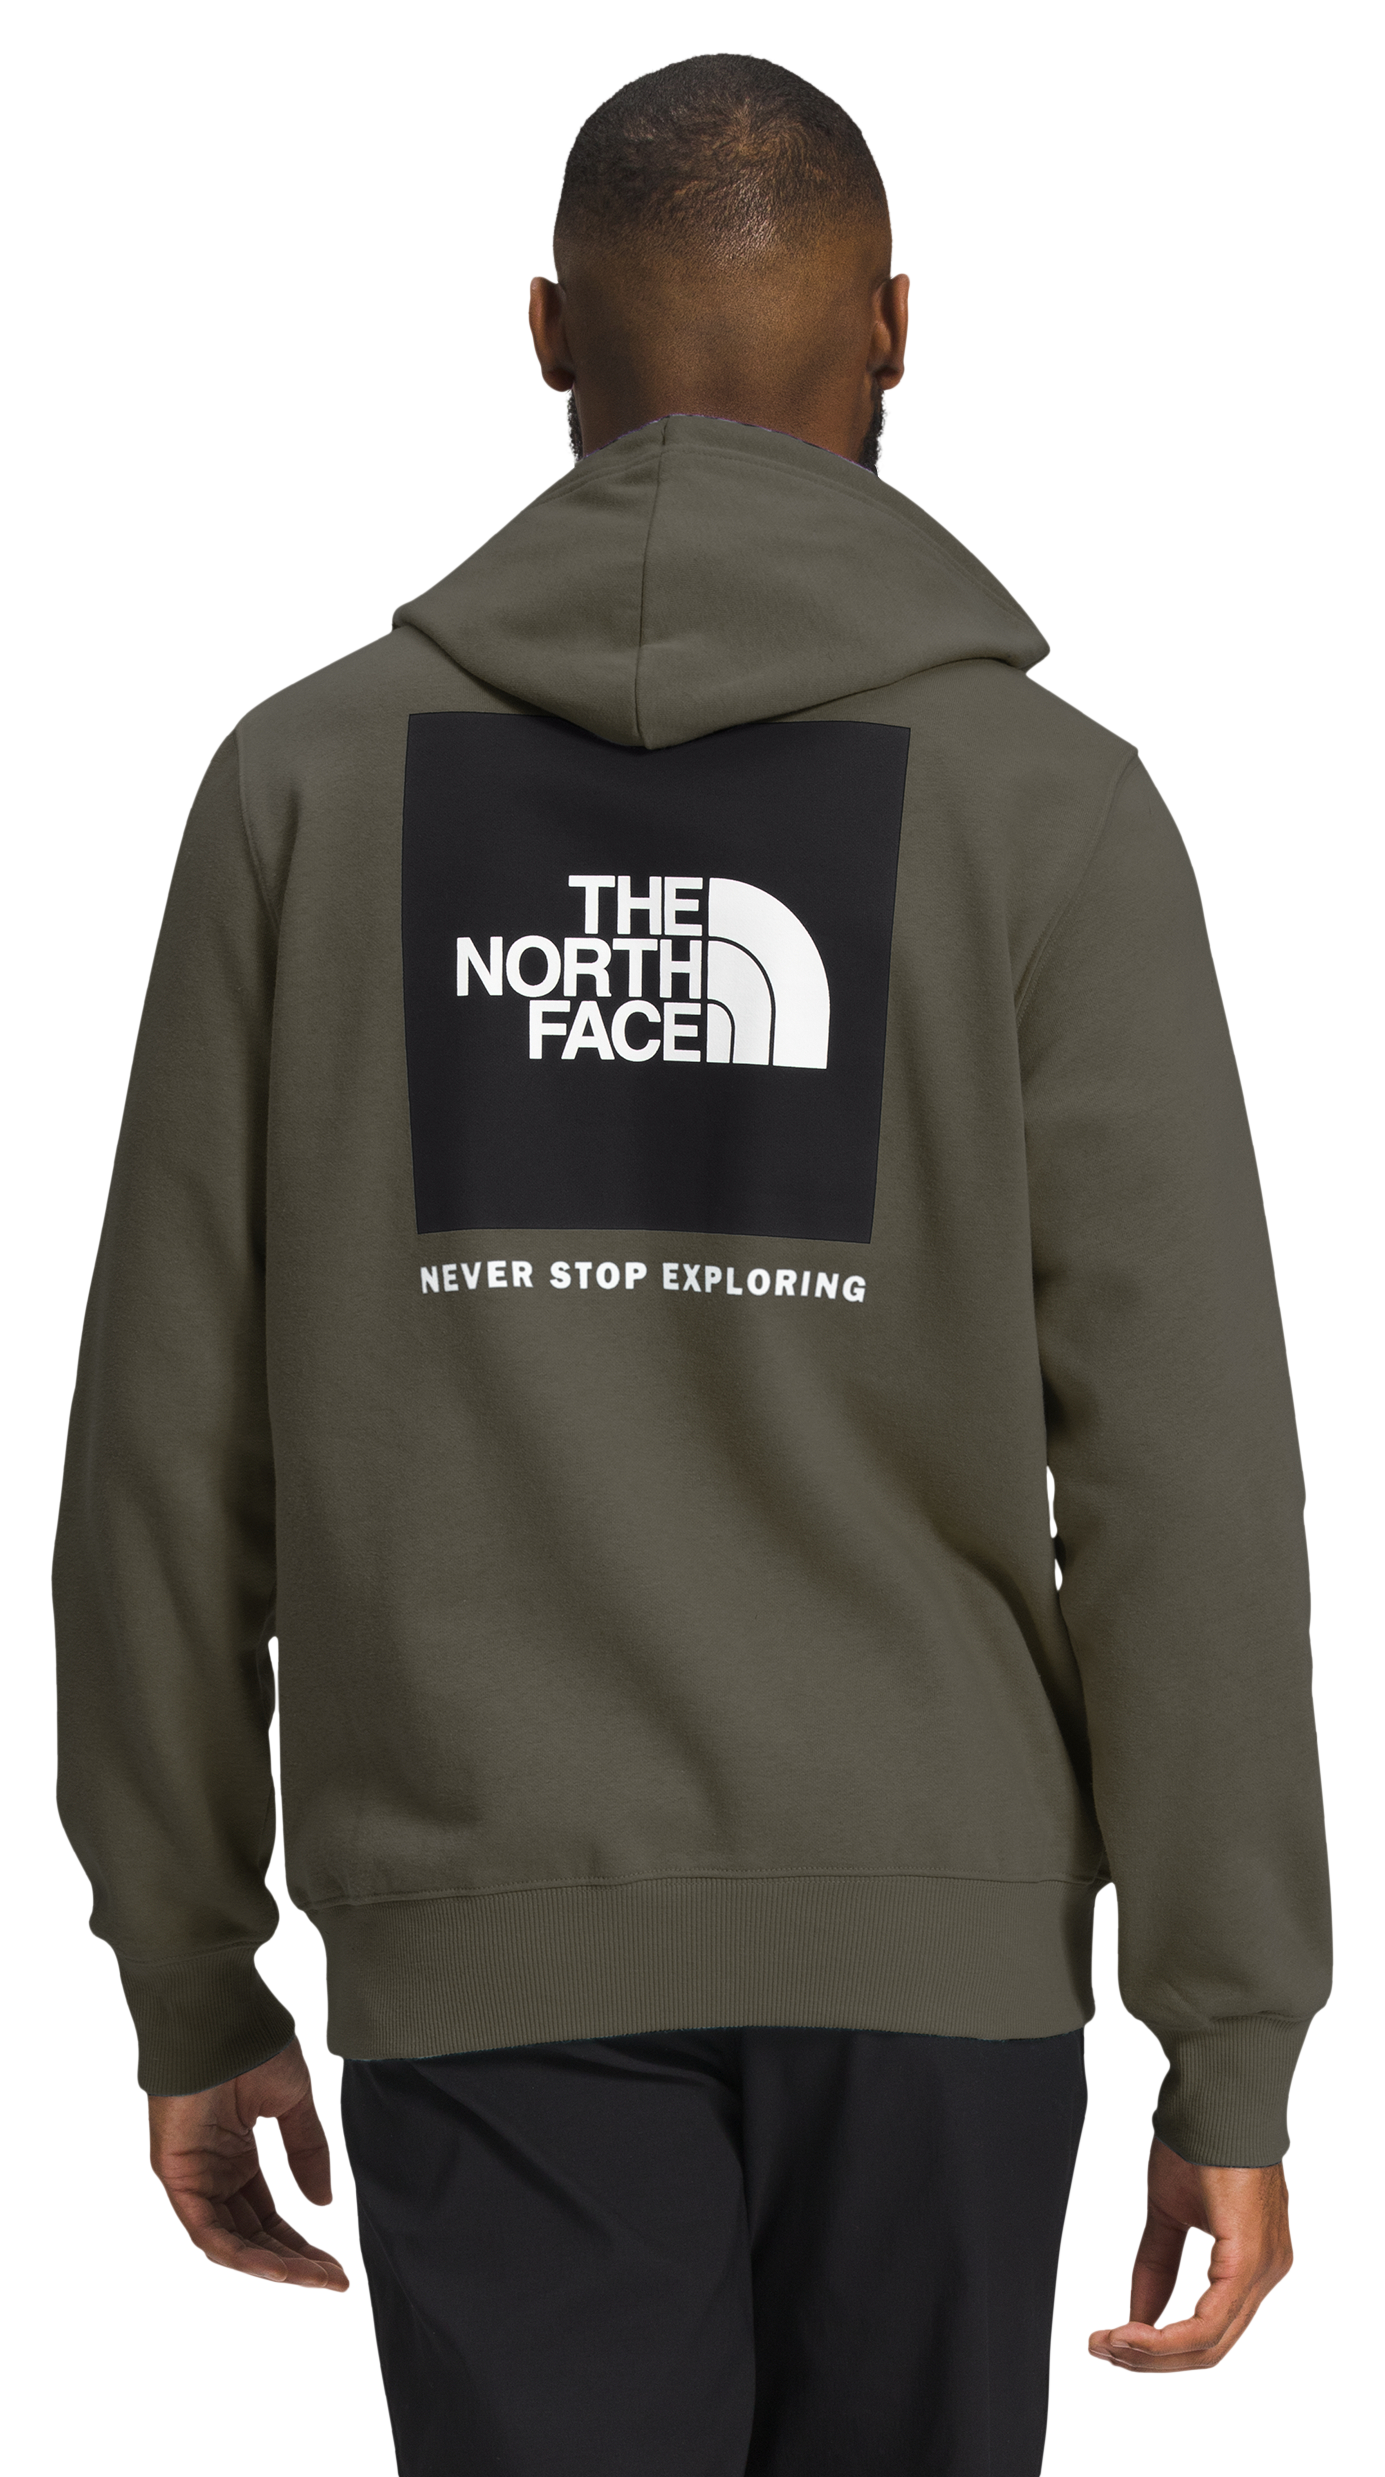 The North Face Box NSE Long-Sleeve Hoodie for Men - New Taupe Green/Black - L